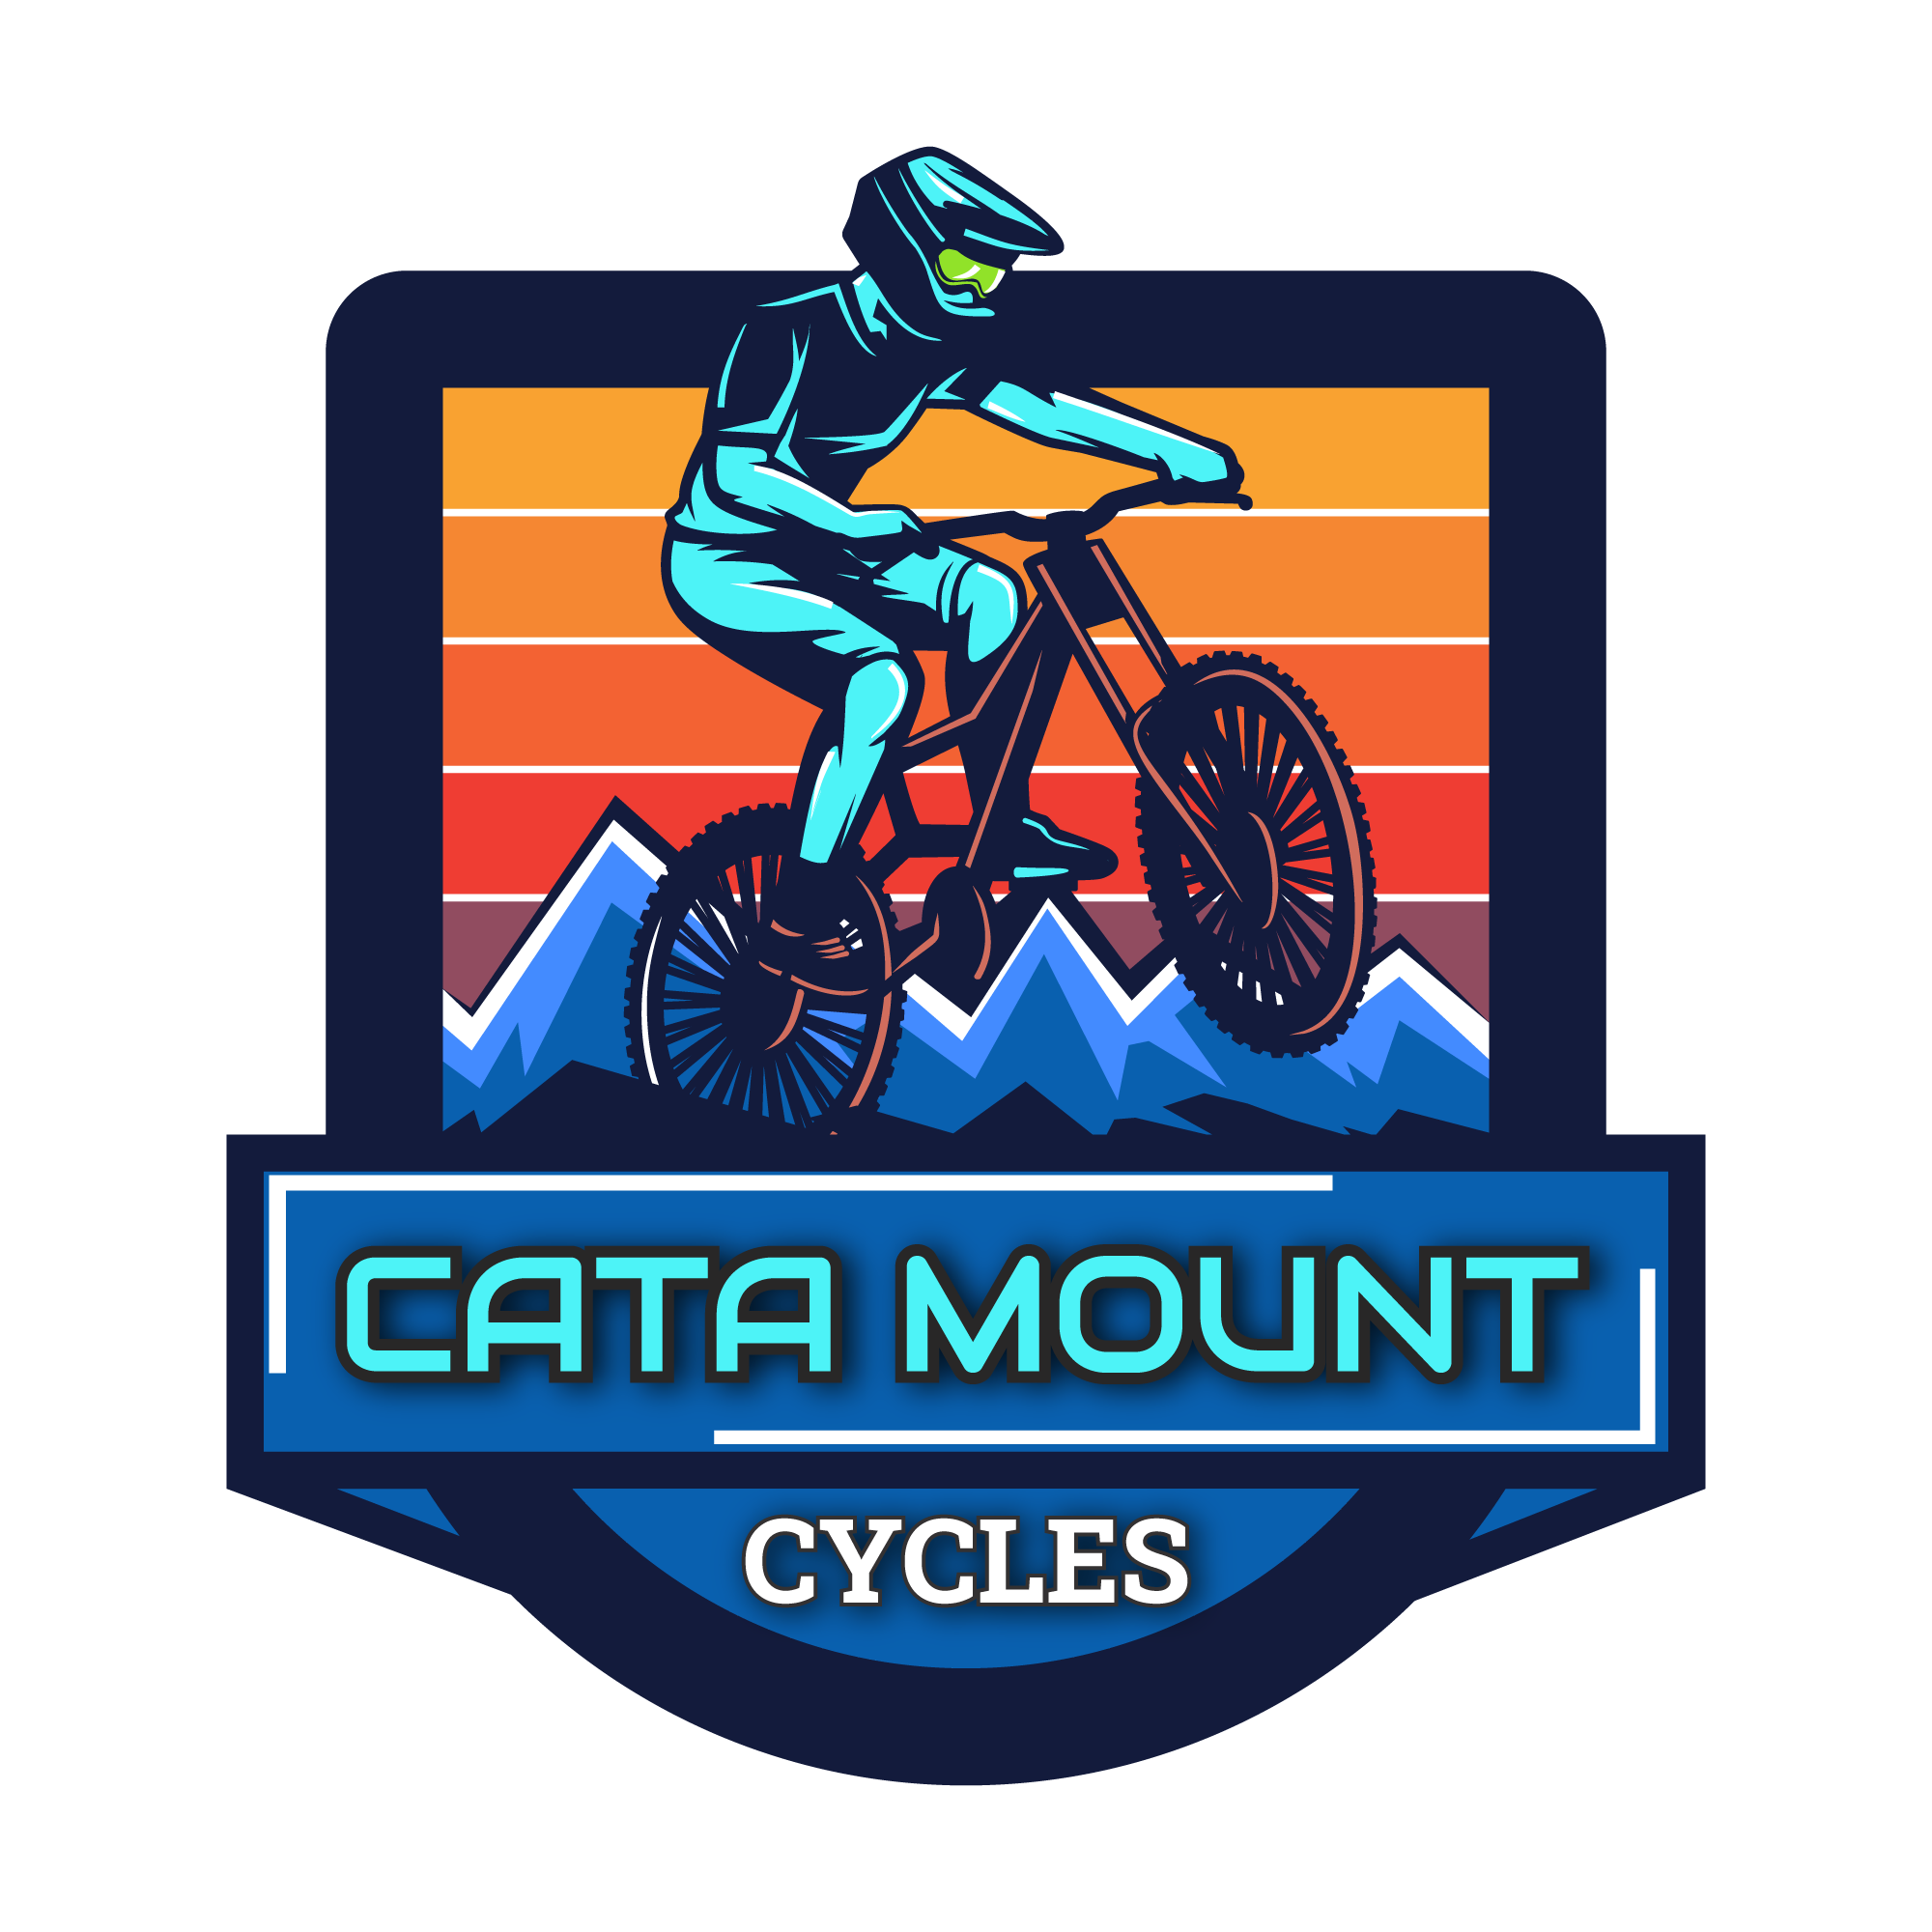 cata-mount-cycles